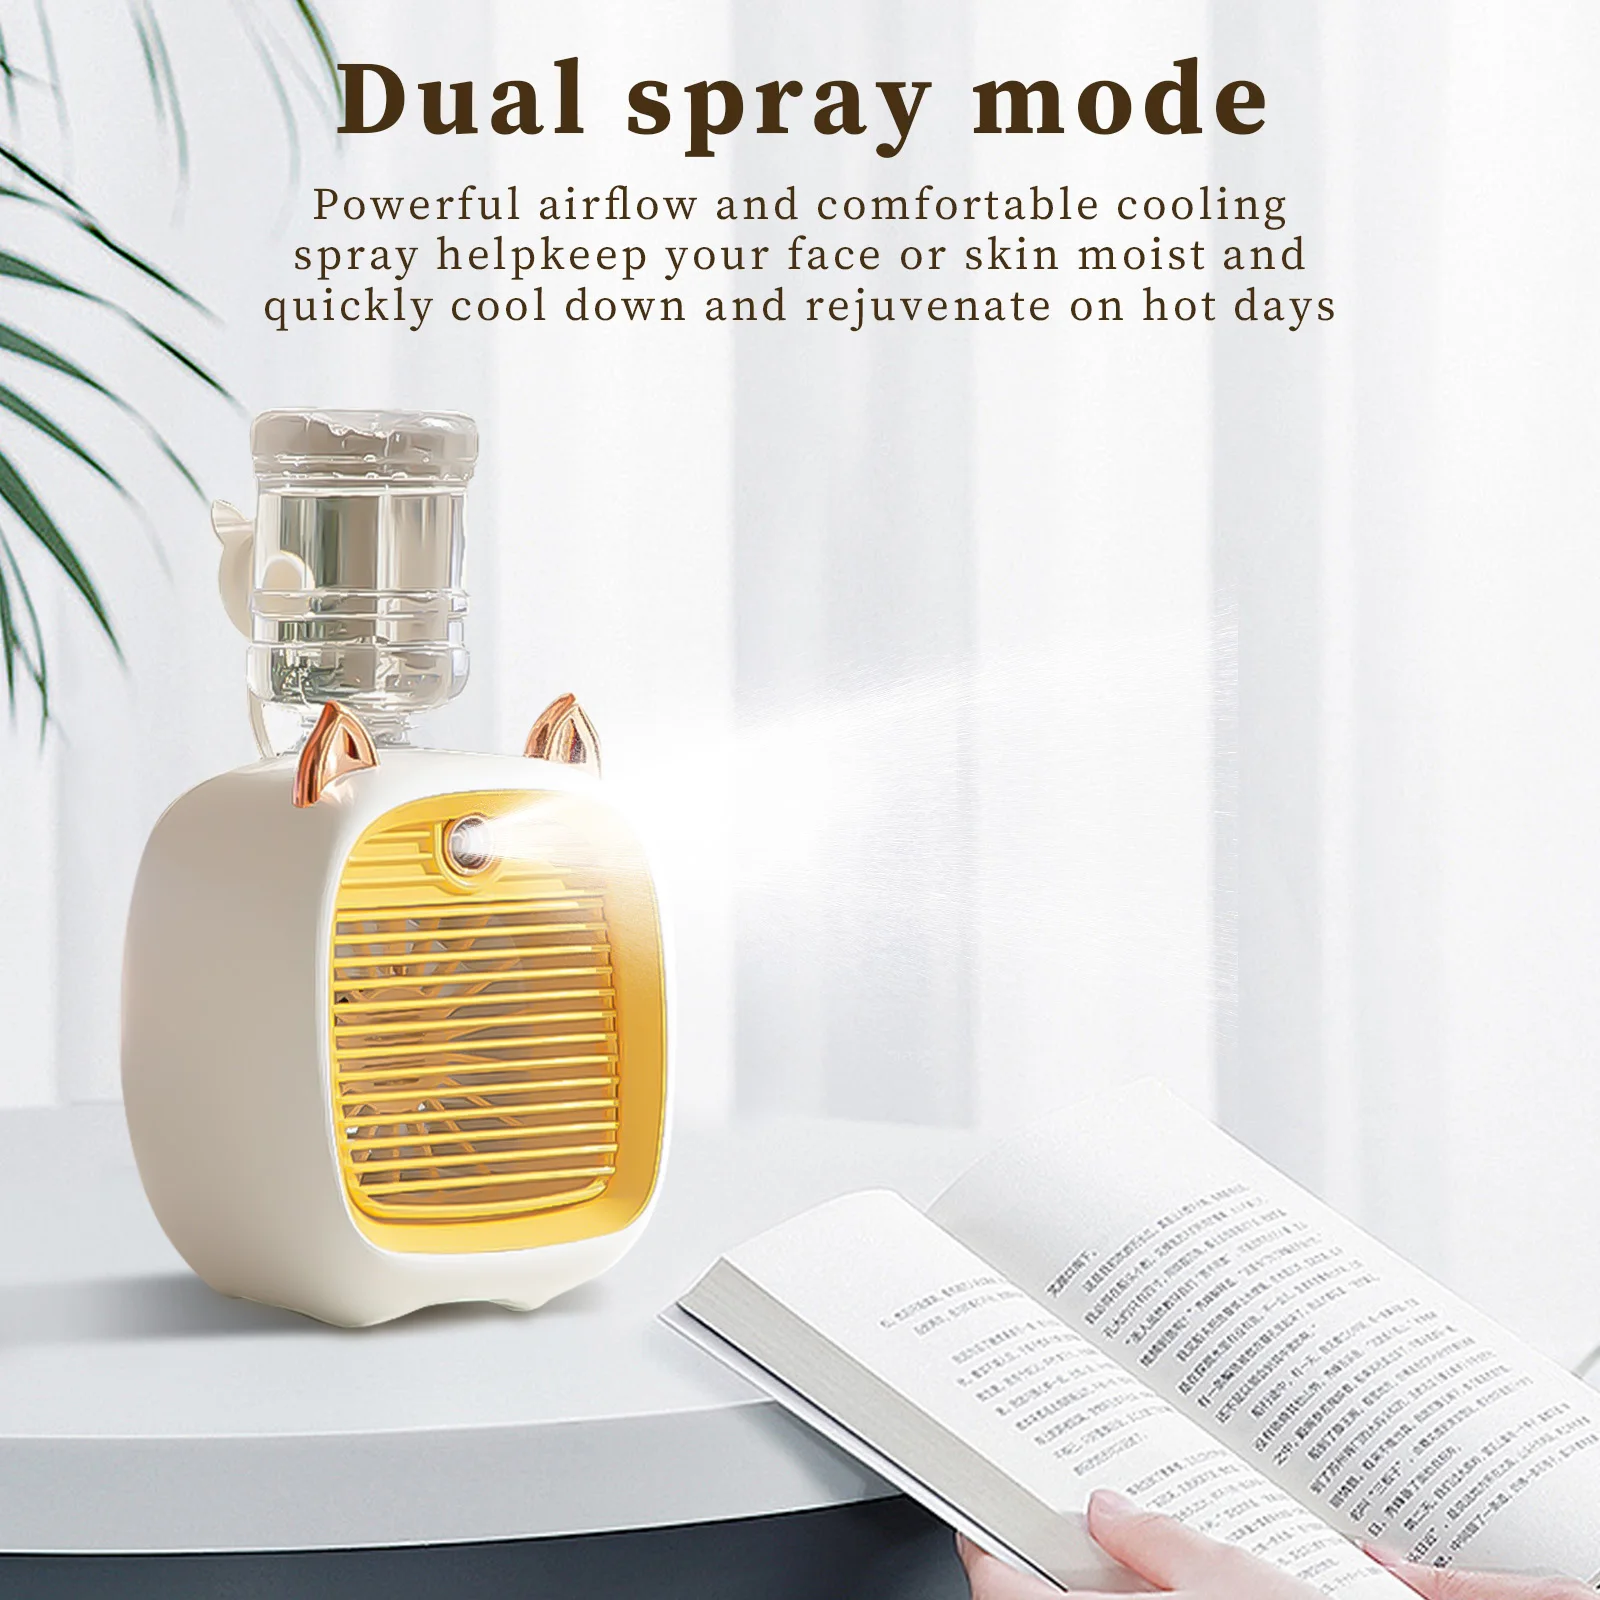 

USB Water Cooling Electric Fan Portable 2400mAh Humidifier Purifier Fan 2 Spray Modes Type-C Charging with Water Bottle